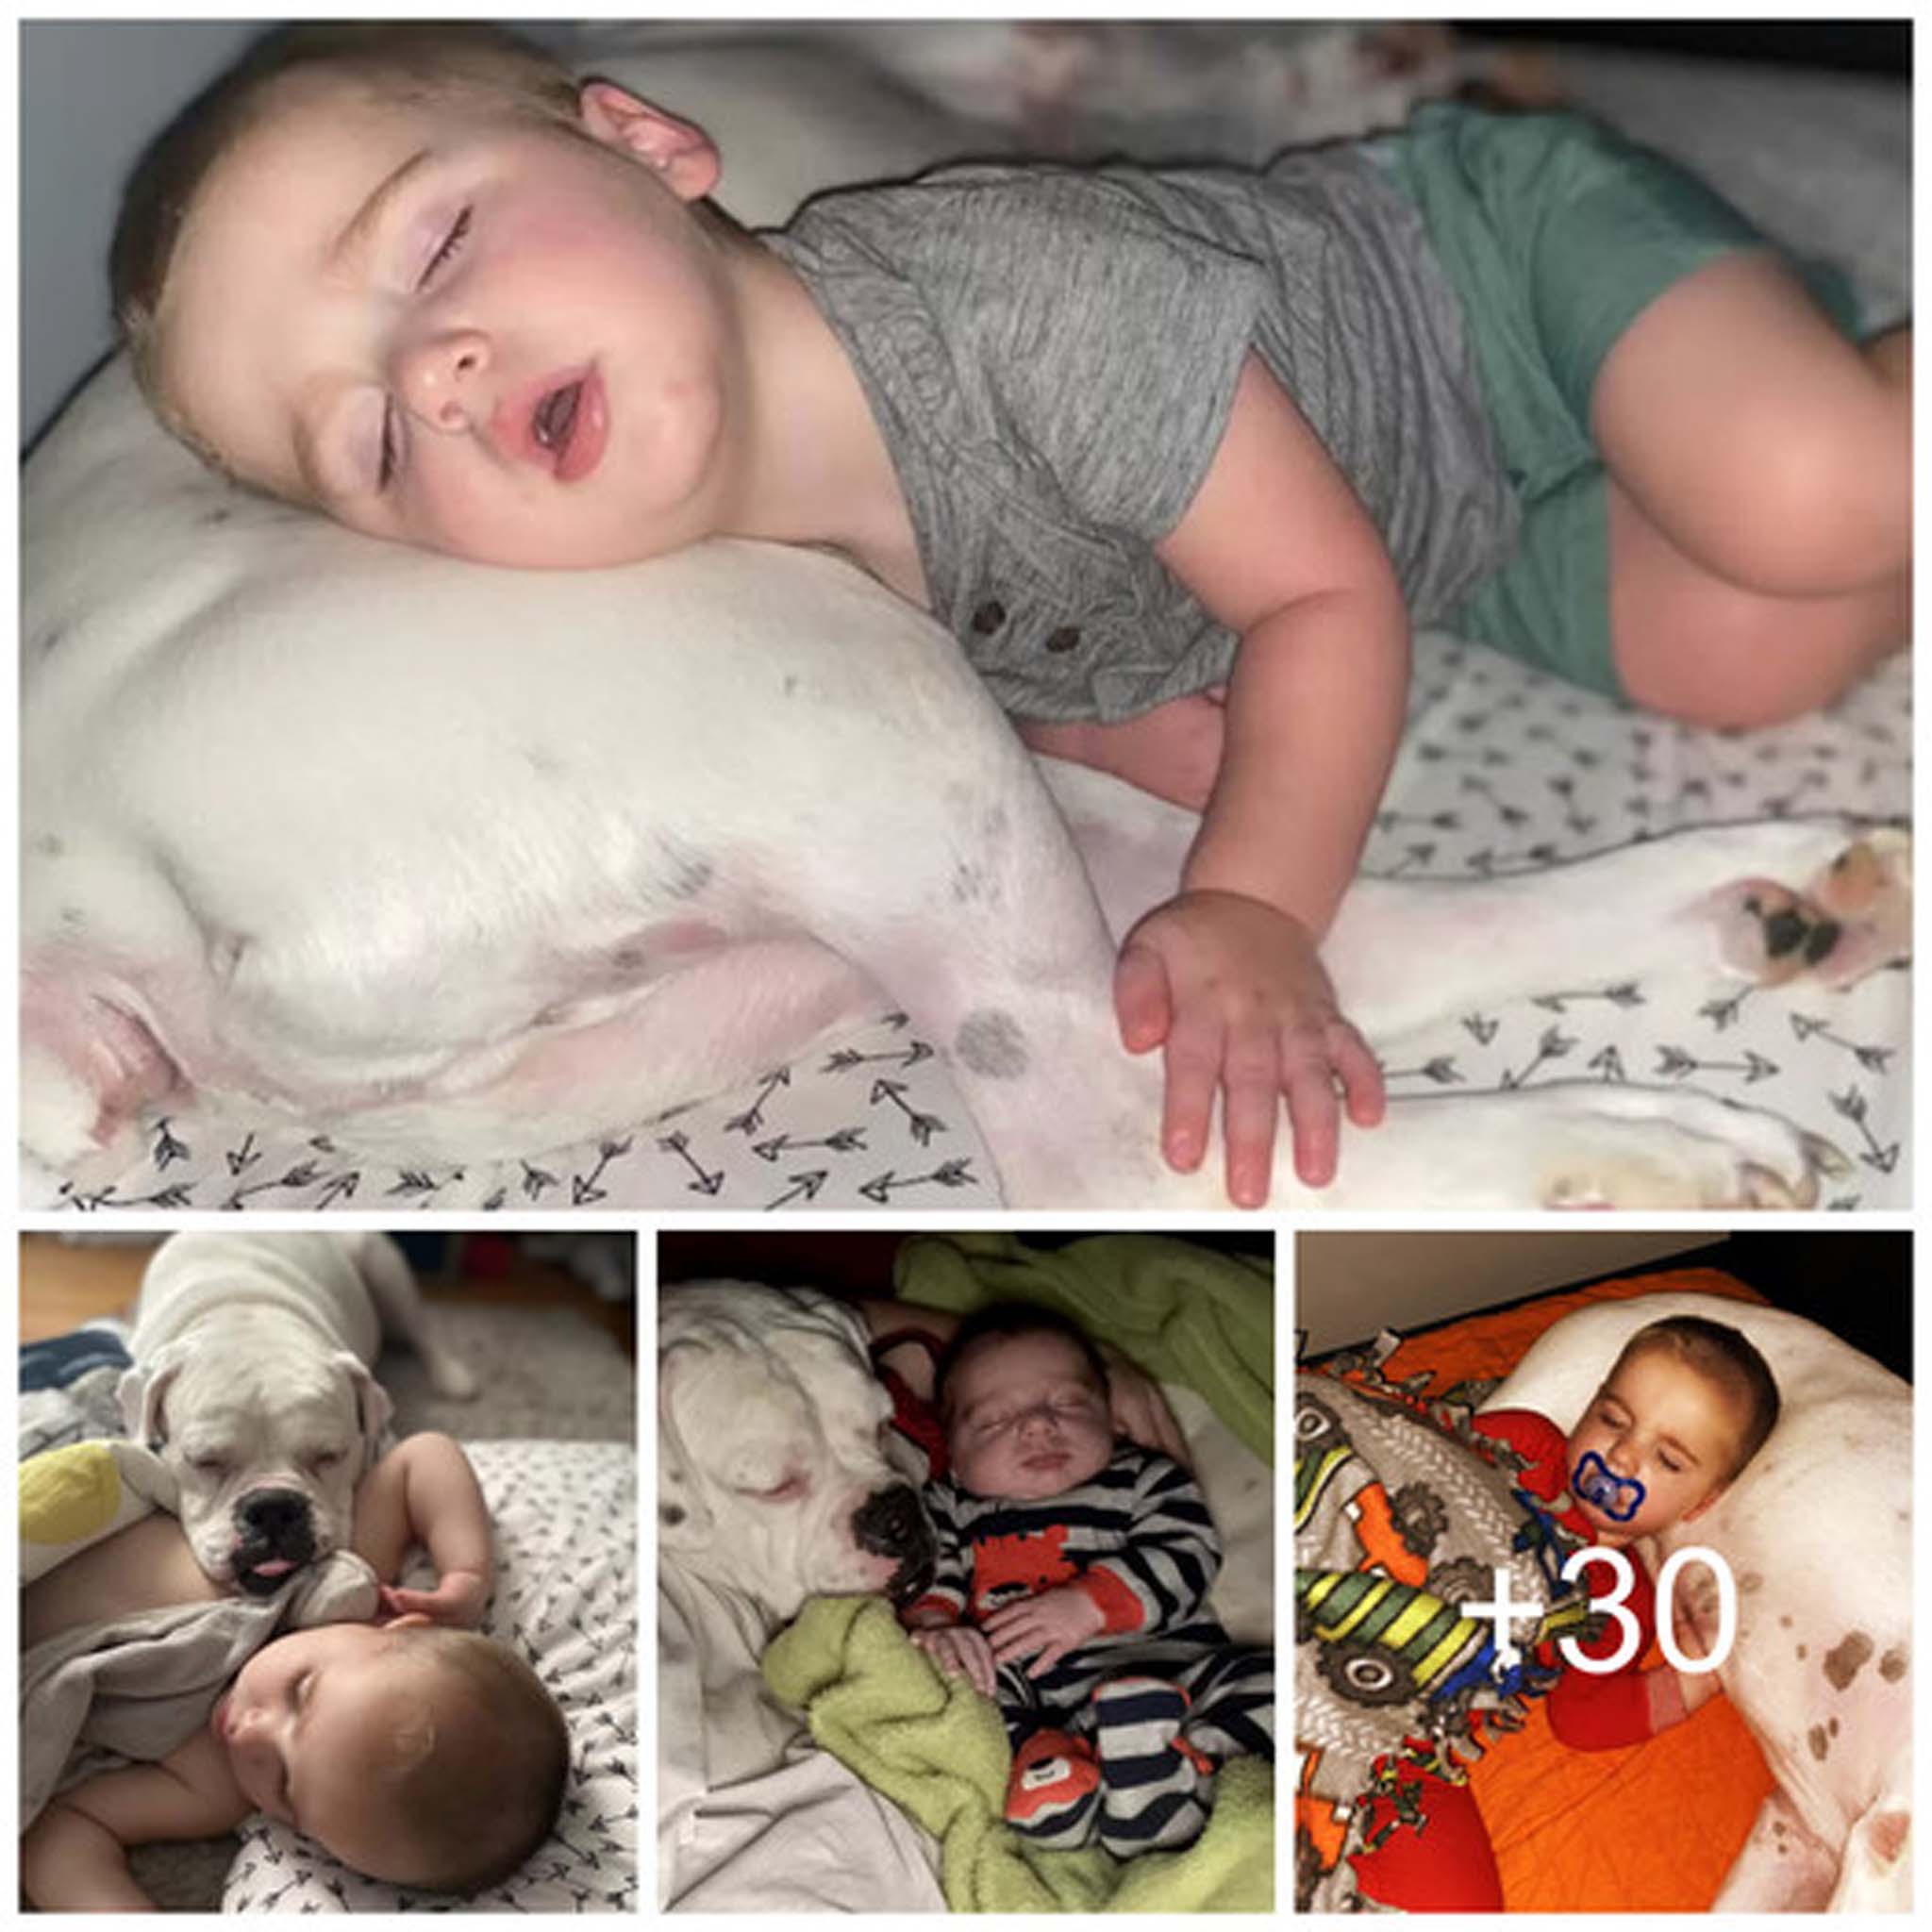 “Unbreakable Bonds: Warm moments between children and their furry companions that are inseparable even during sleep.”